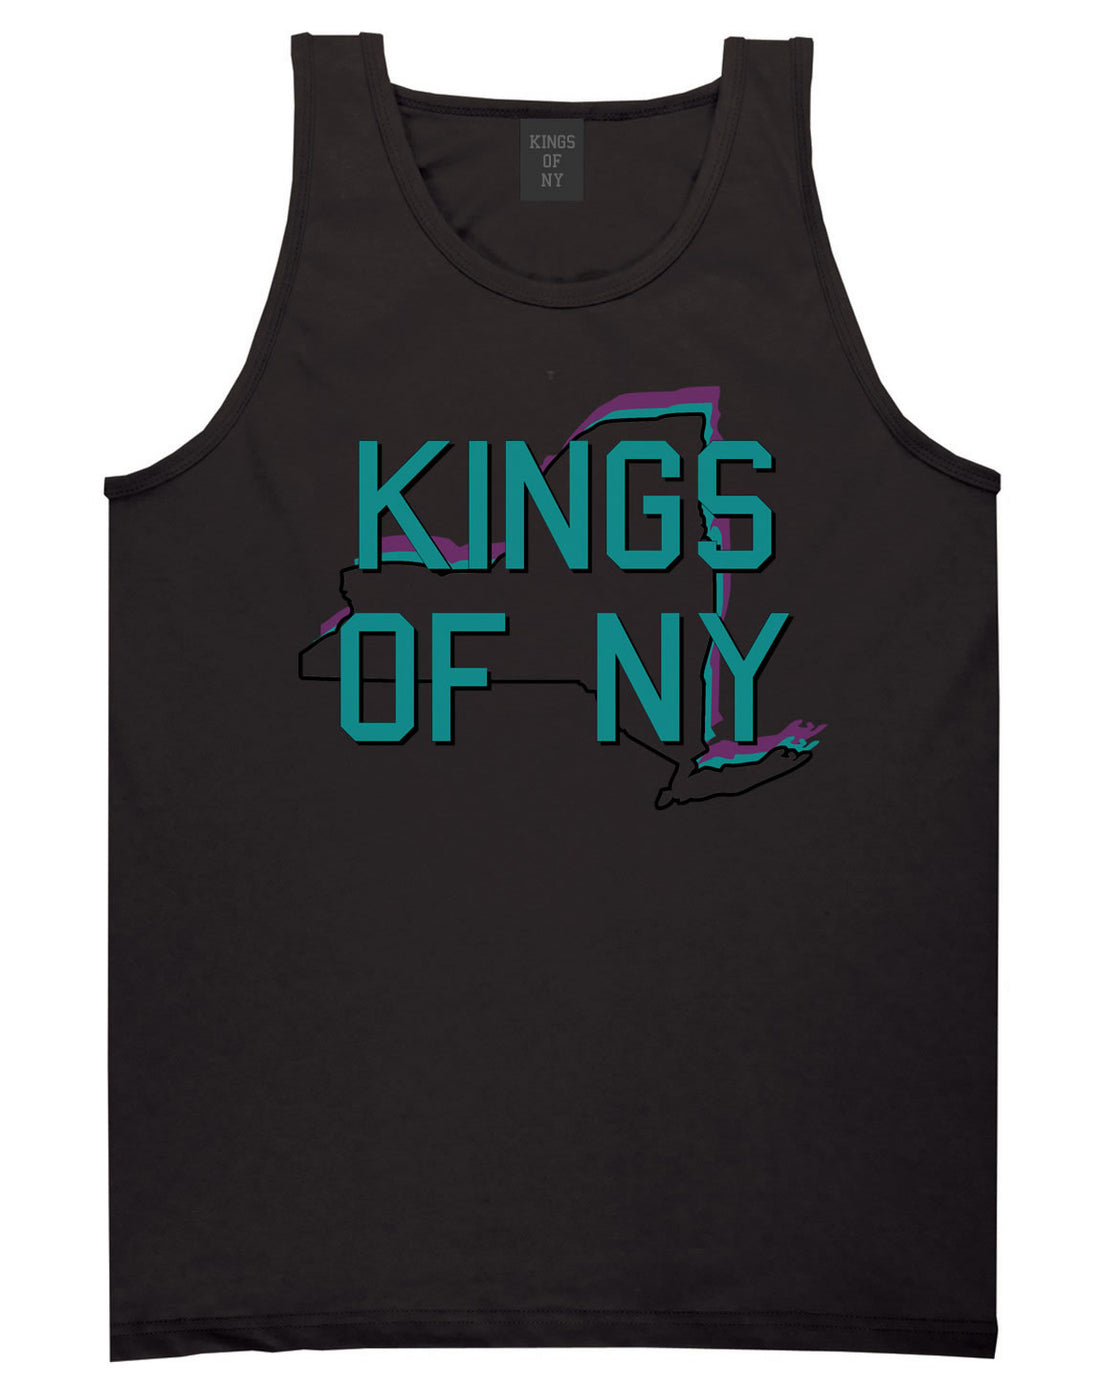 New York State Outline Tank Top in Black by Kings Of NY